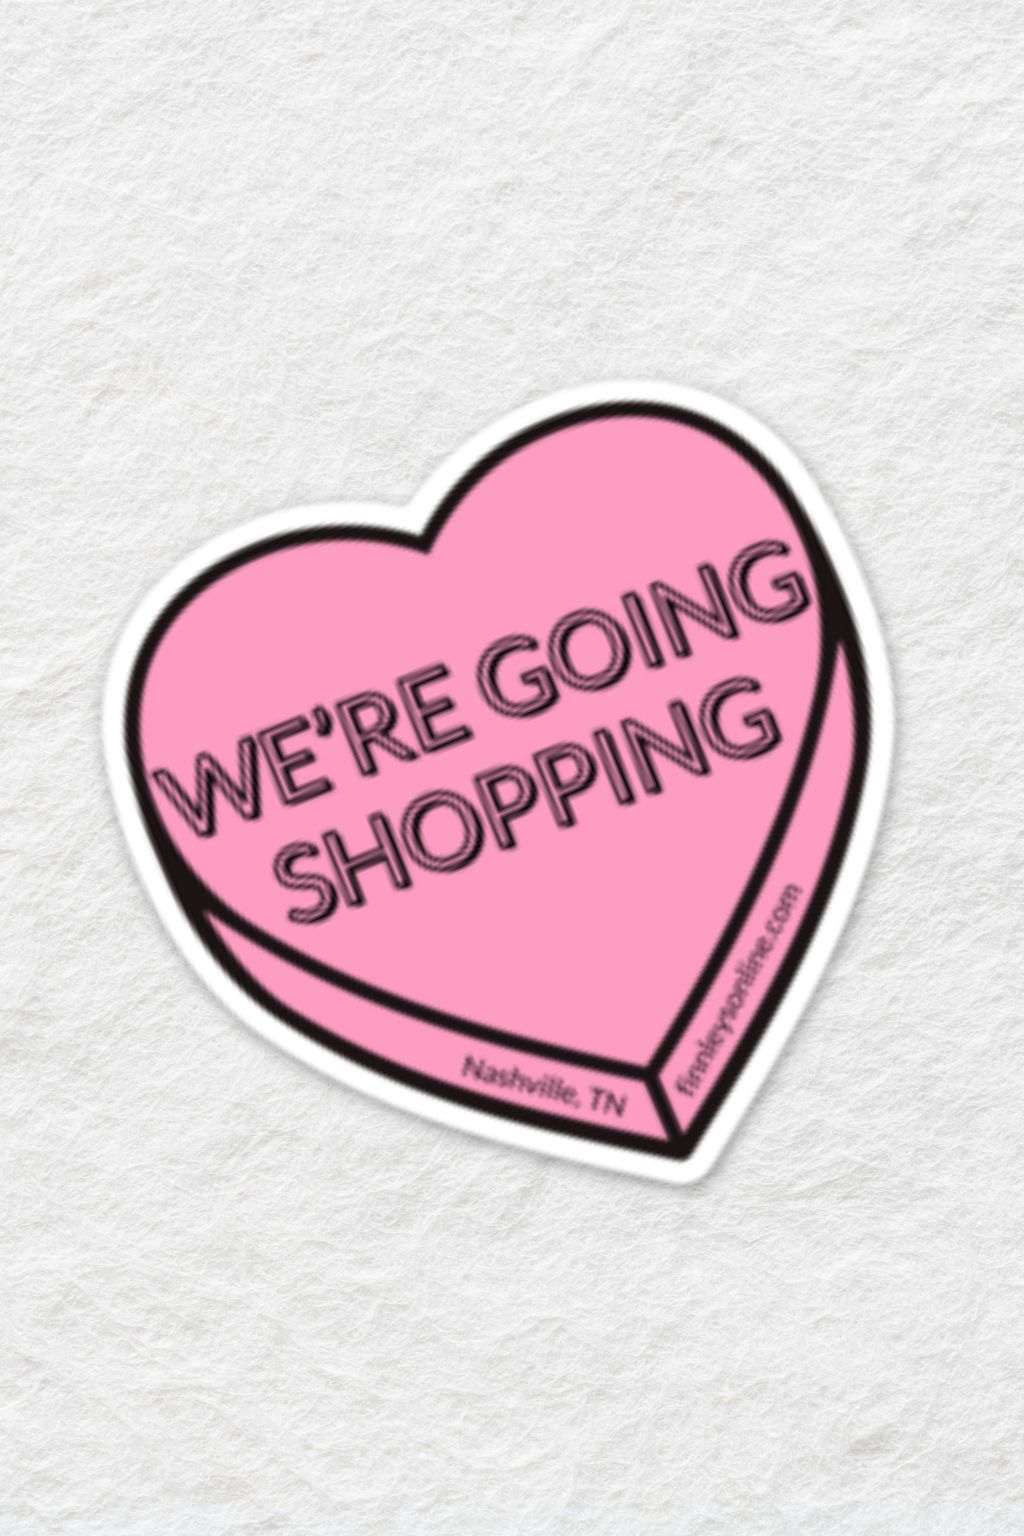 We're Going Shopping Sticker